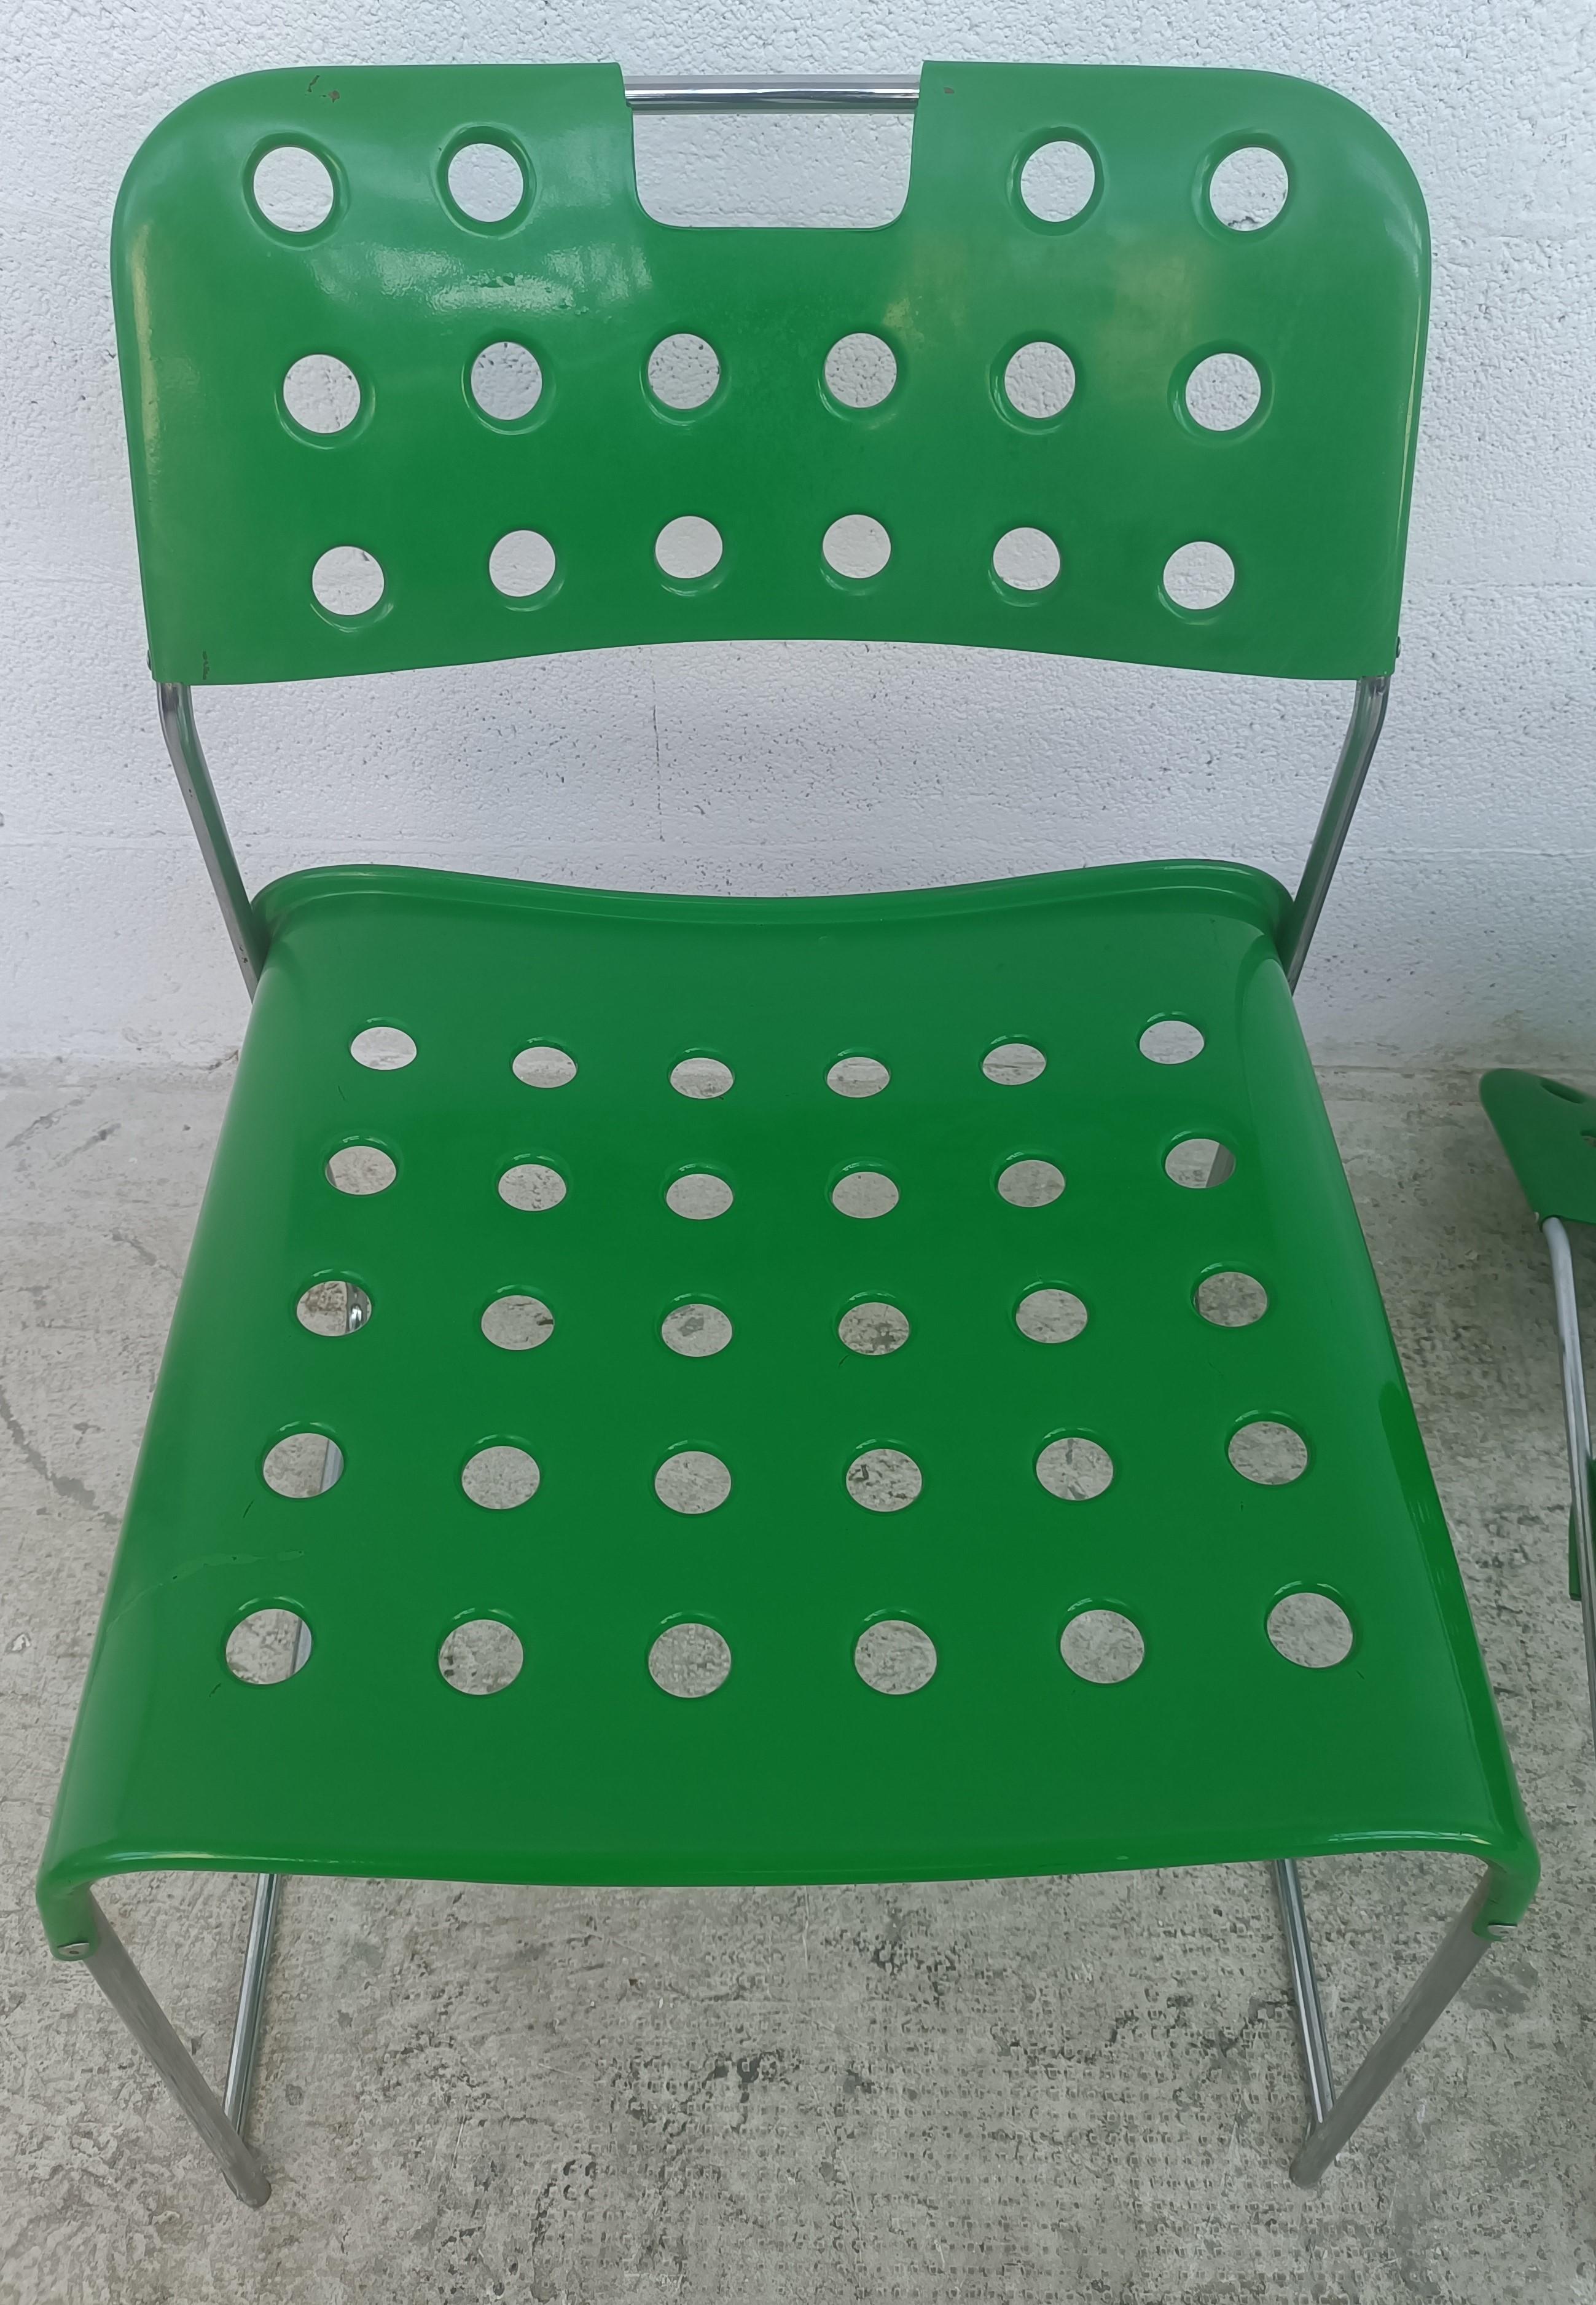 4 Green Omkstak Stackable Chairs by Rodney Kinsman for Bieffeplast 70s For Sale 1